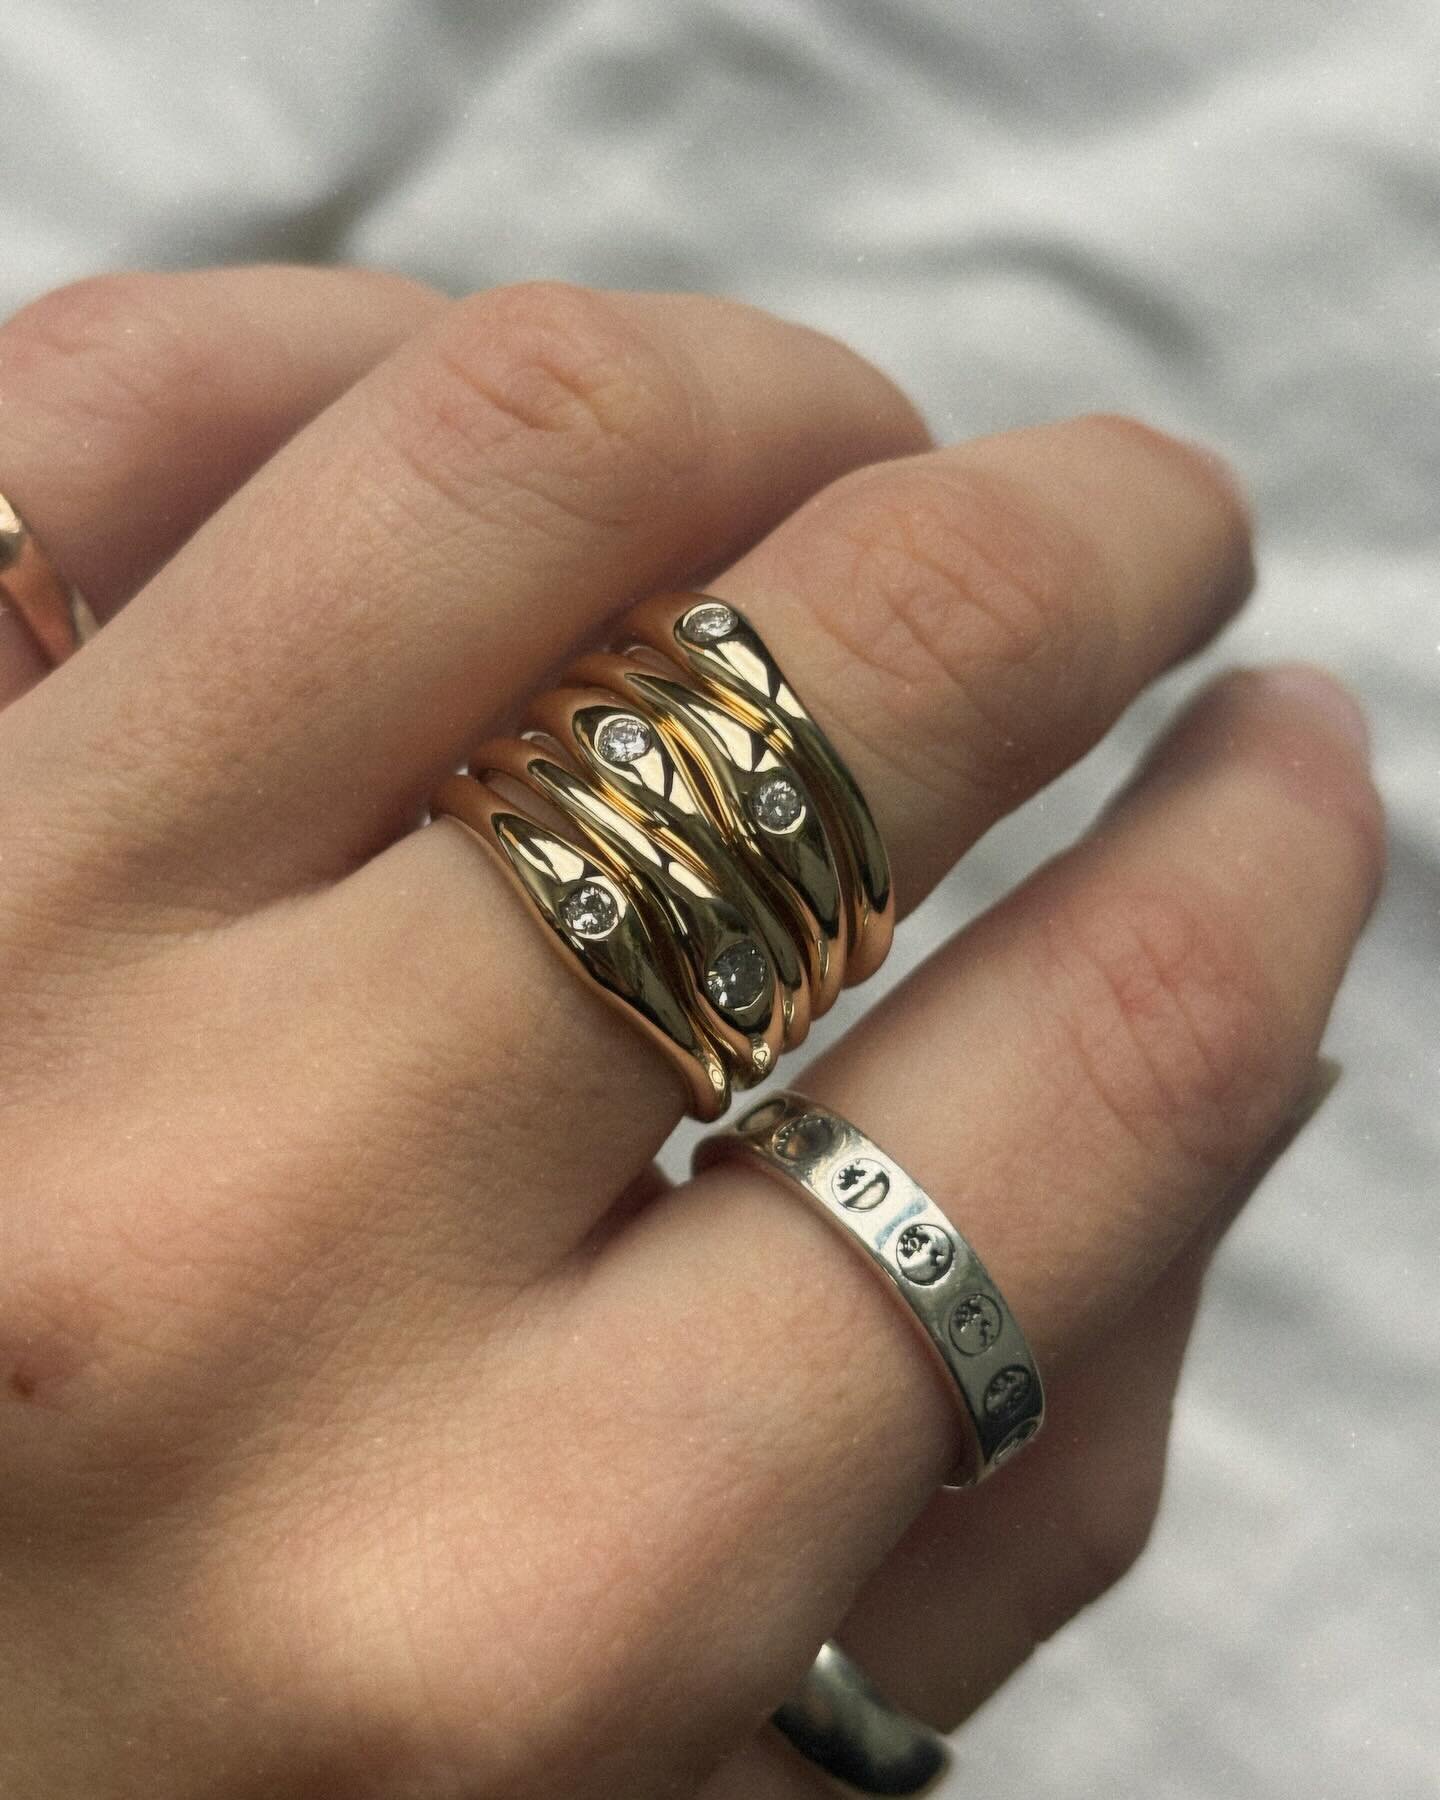 🩵 River rings 🩵 

These rings were hand carved from jewellers wax, and cast into 9k recycled gold. Each one was made for one of my cousins, out of my grandmas gold, for us to wear in memory of her. 
The river rings are set with five beautiful famil